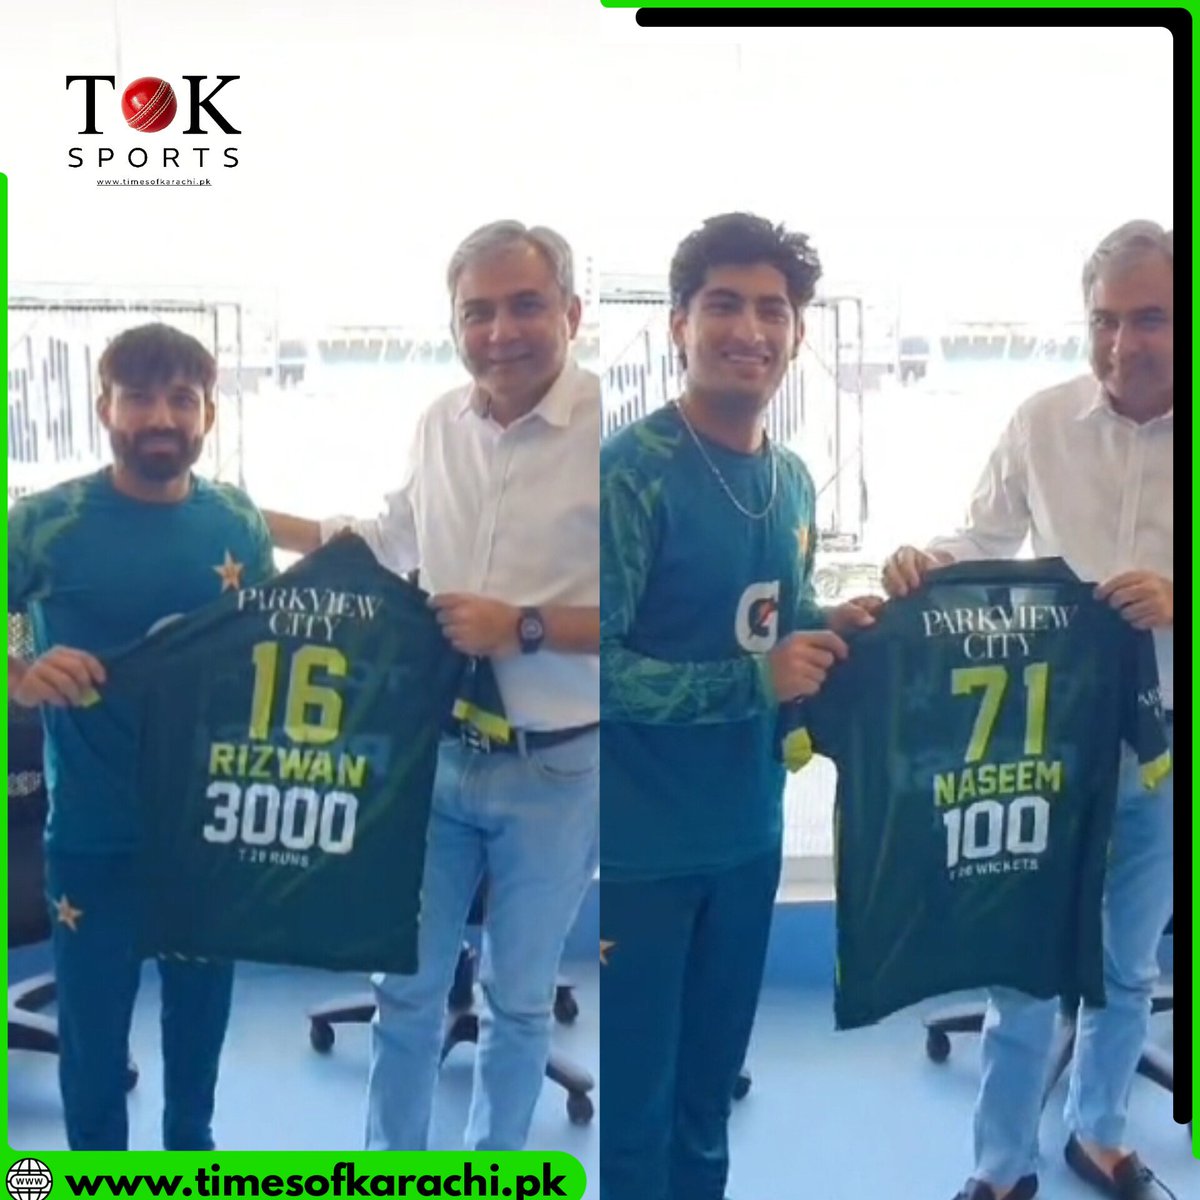 PCB Chairman Mohsin Naqvi presented a special green shirt to Mohammad Rizwan for completing 3000 runs in T20i matches, while Naseem Shah received the same honor for taking 100 wickets in T20i matches. #TOKSports #MohsinNaqvi #MohammadRizwan #NaseemShah